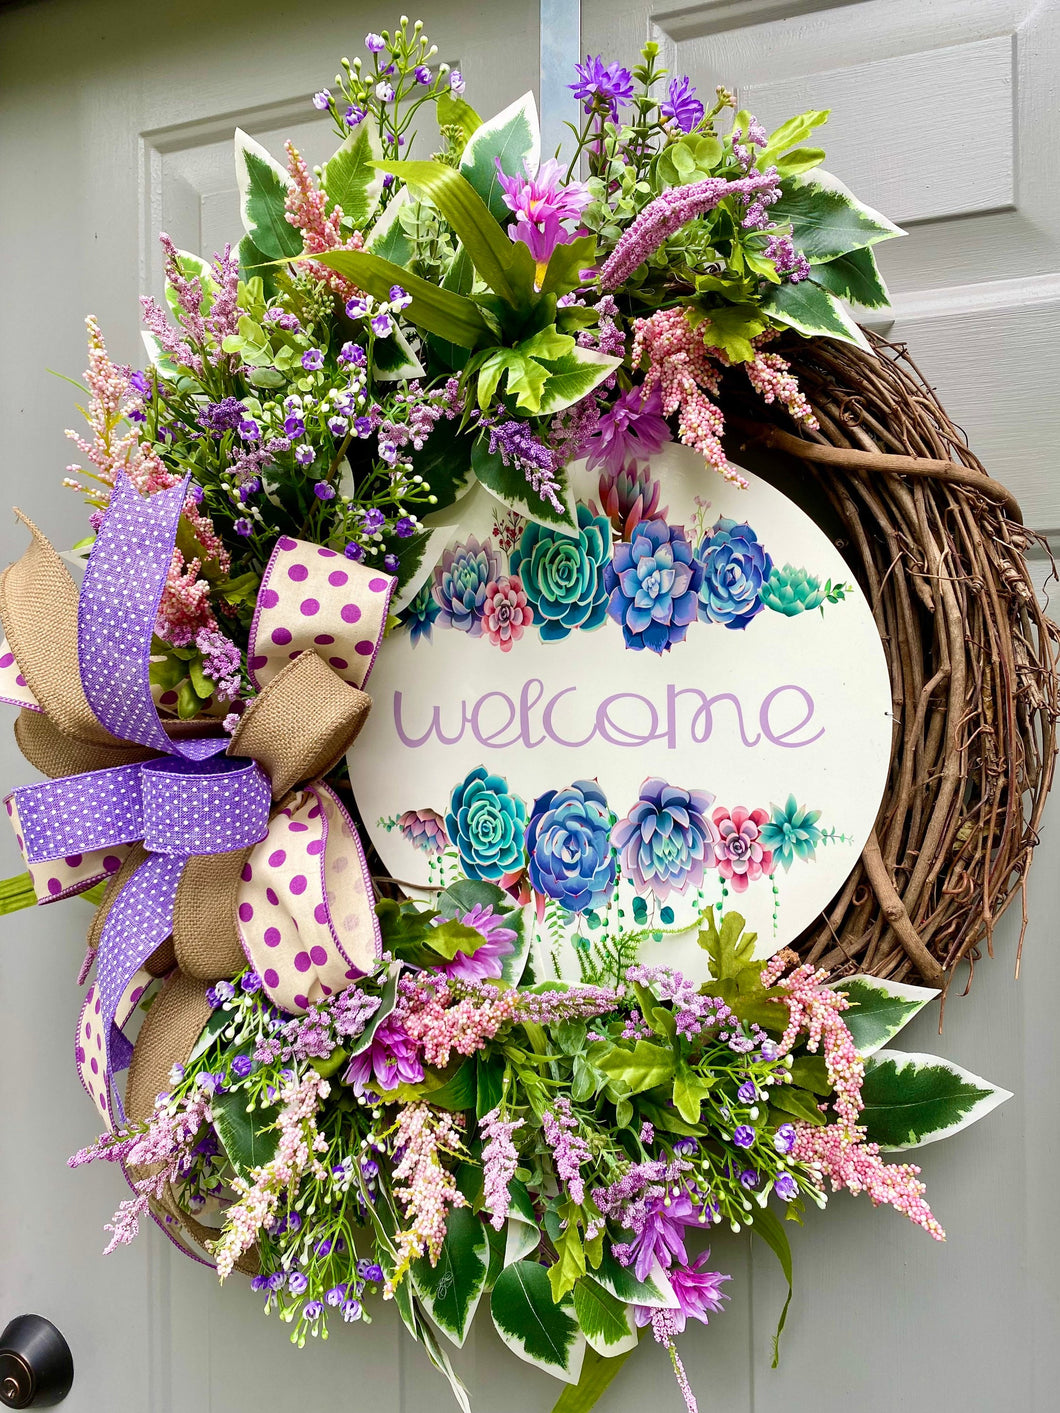 7 Spring Wreaths You Won't Find in Stores - Grandin Road Blog